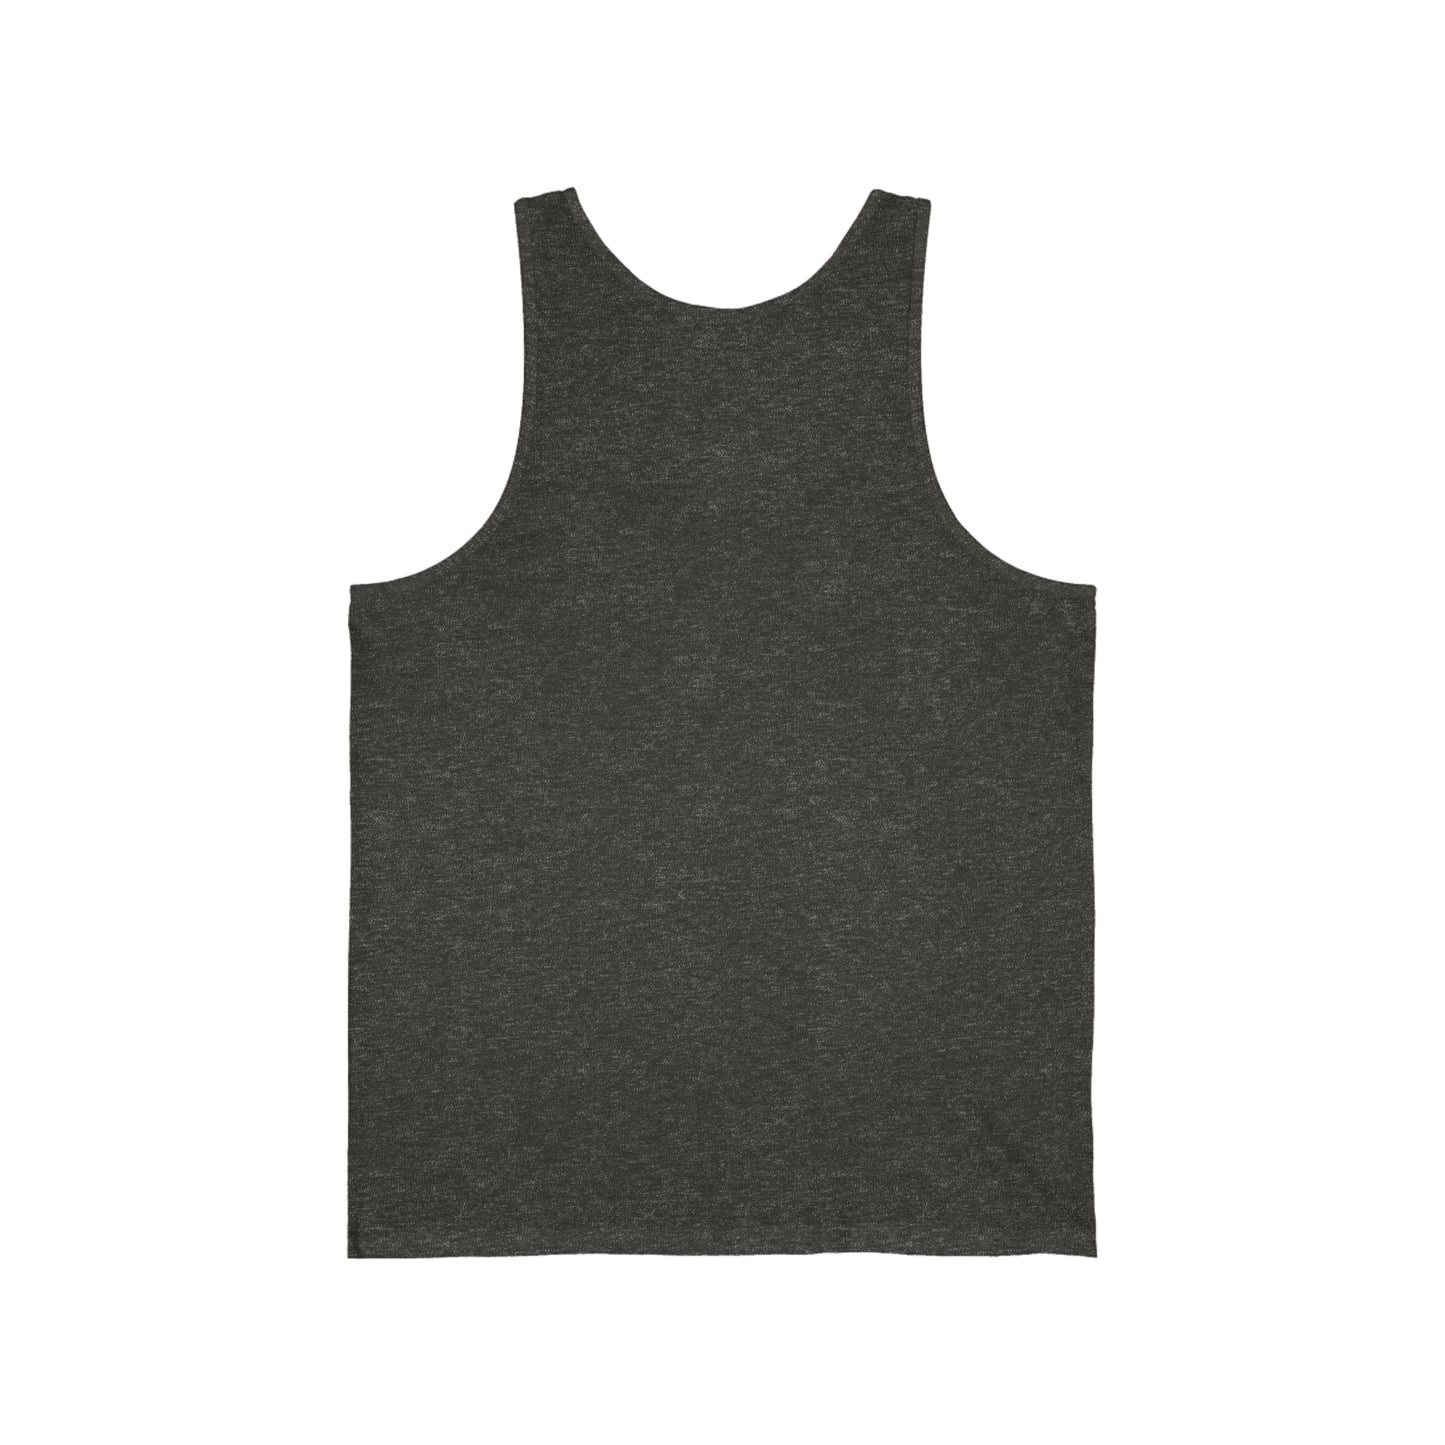 A Printify Unisex Jersey Tank in dark gray displayed against a white background, purchased in Cabbagetown, Toronto. The tank top features a scoop neckline and has a sleeveless design.